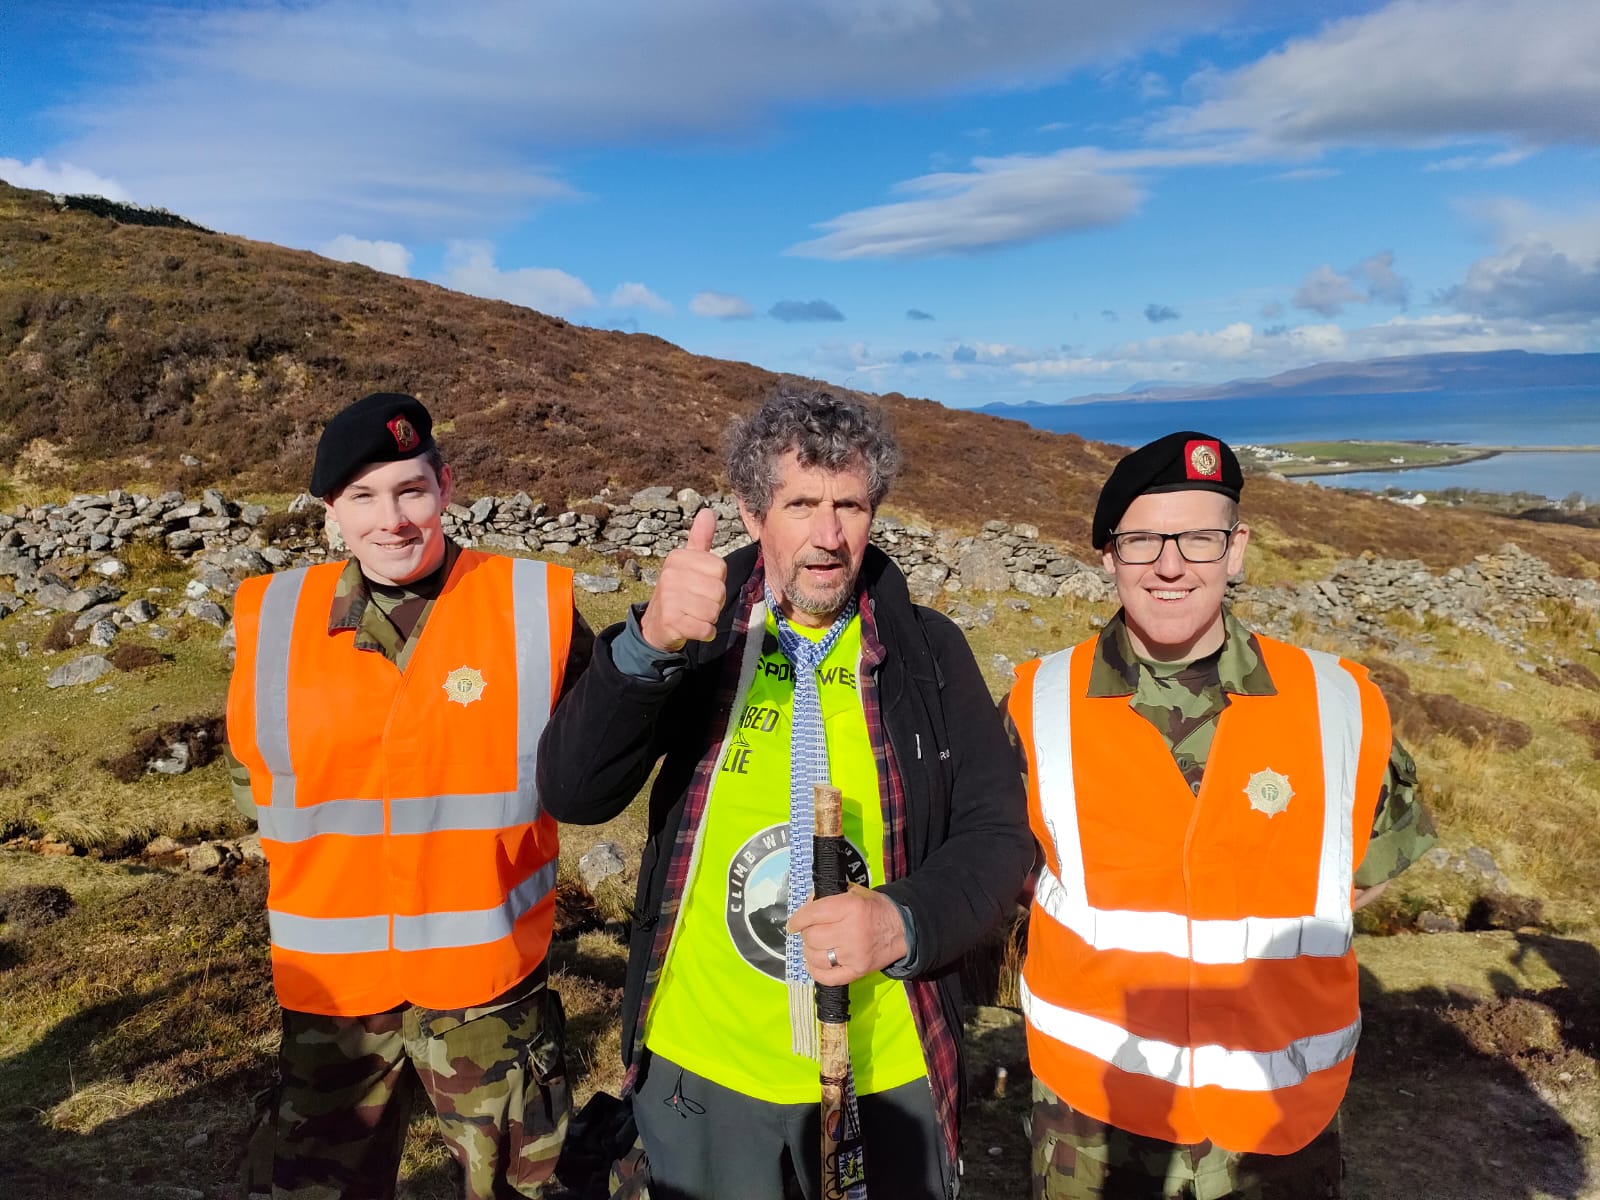 Charlie Bird, centre, poses with members of the Defence Forces on Croagh Patrick (Paul Allen and Associates/PA)